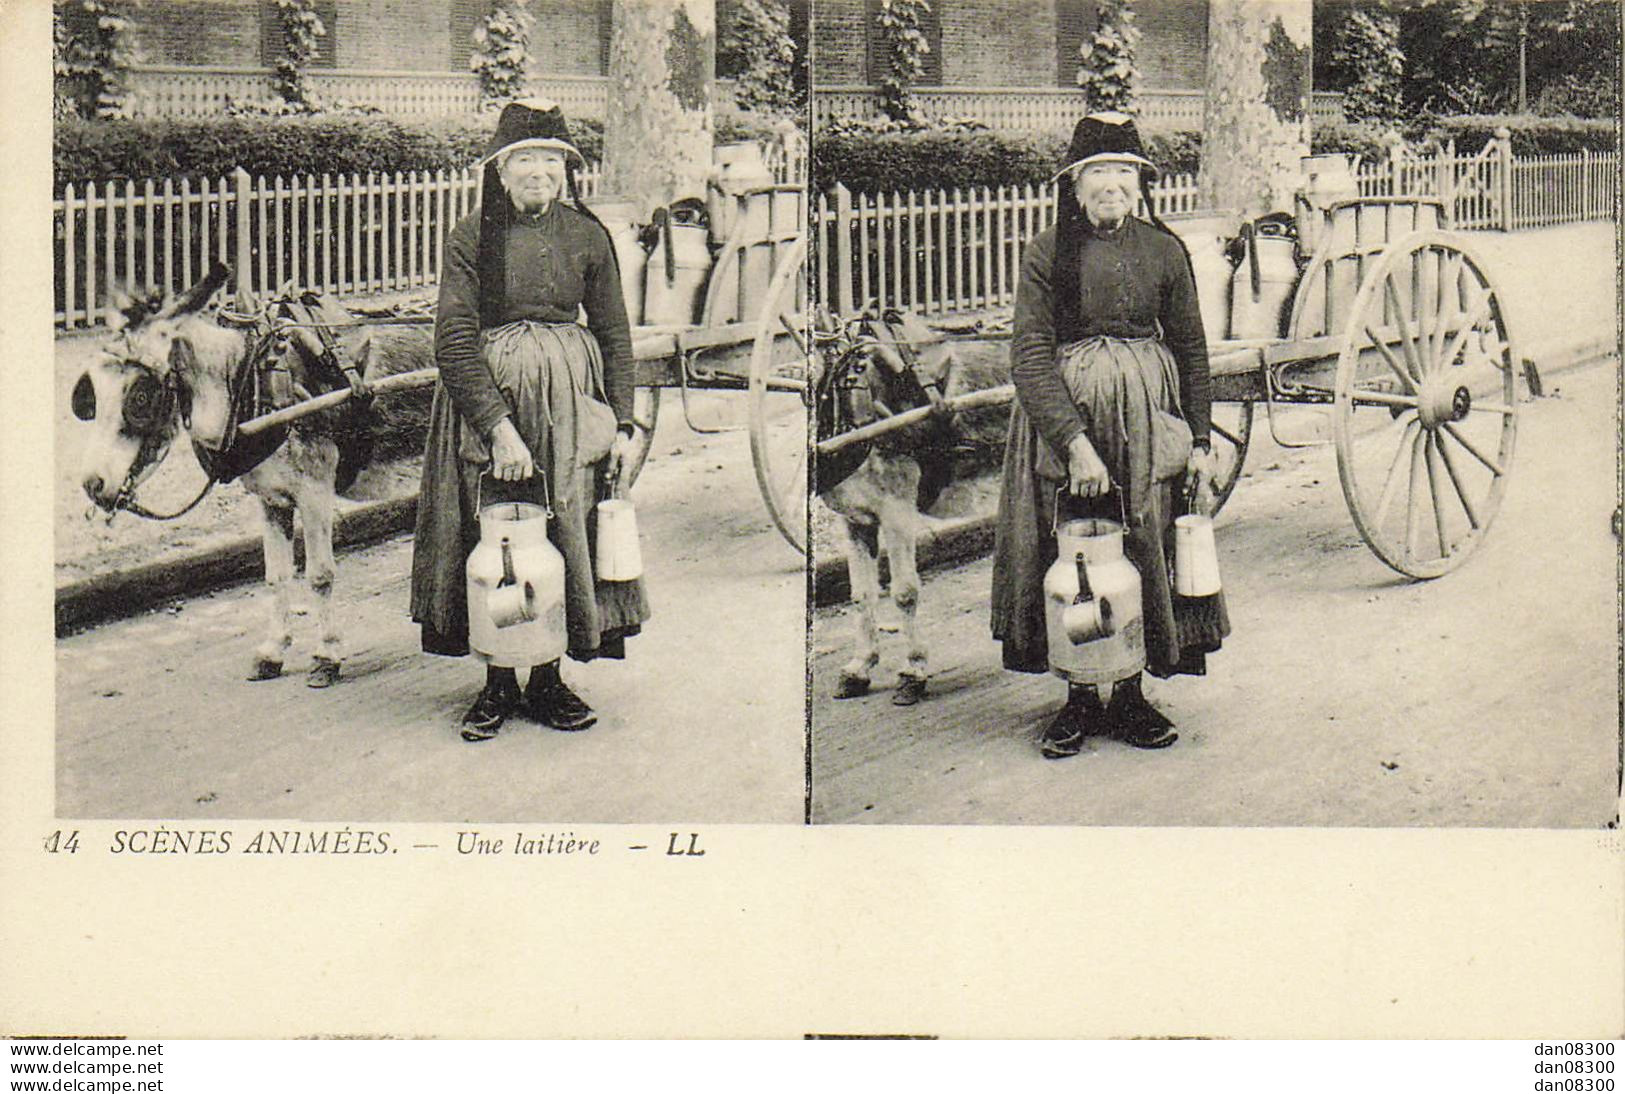 SCENES ANIMEES UNE LAITIERE - Stereoscope Cards